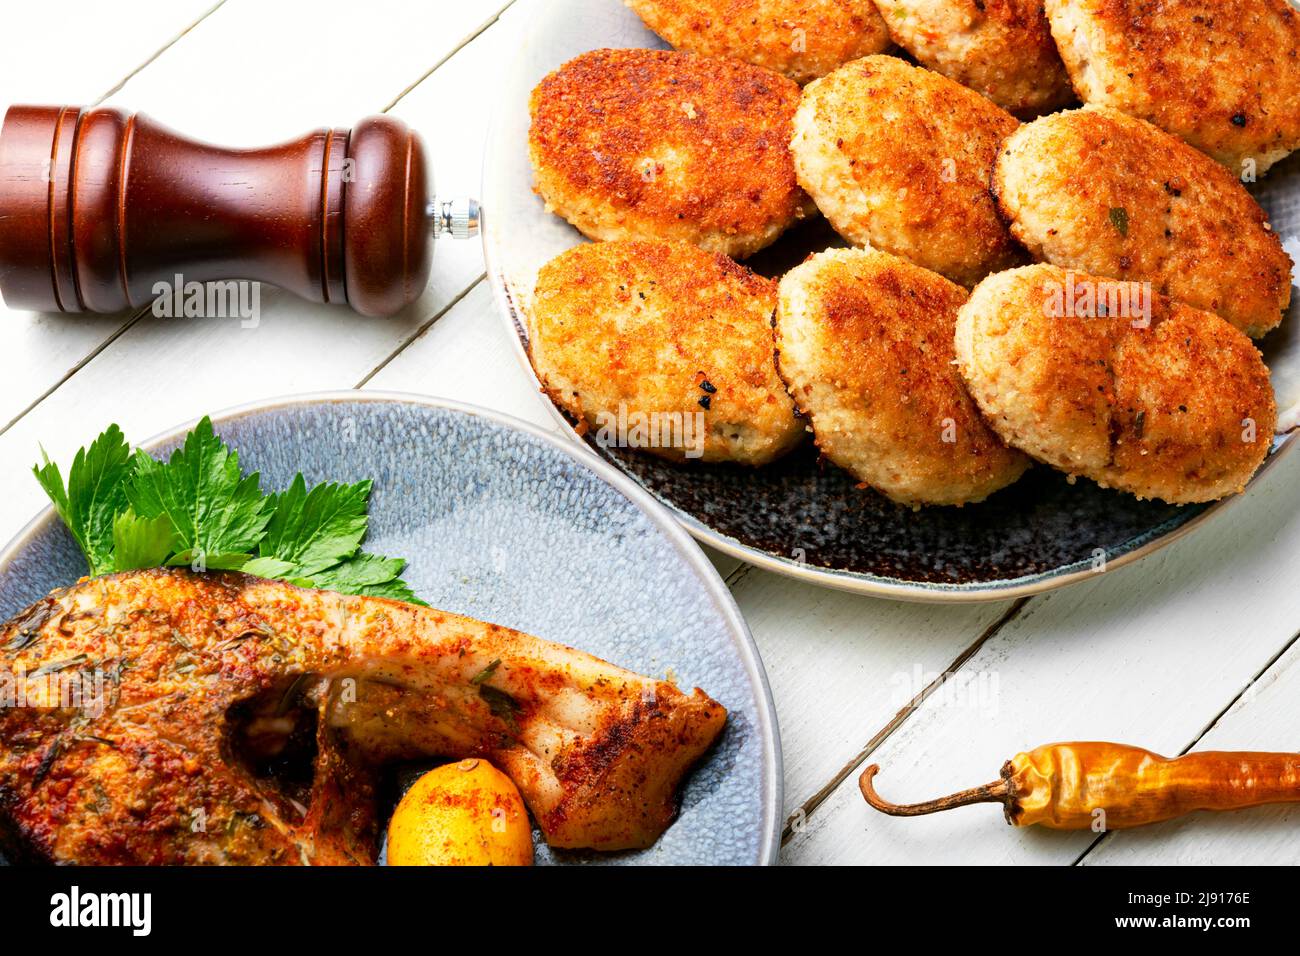 Homemade minced fish cutlets and fish steak Stock Photo